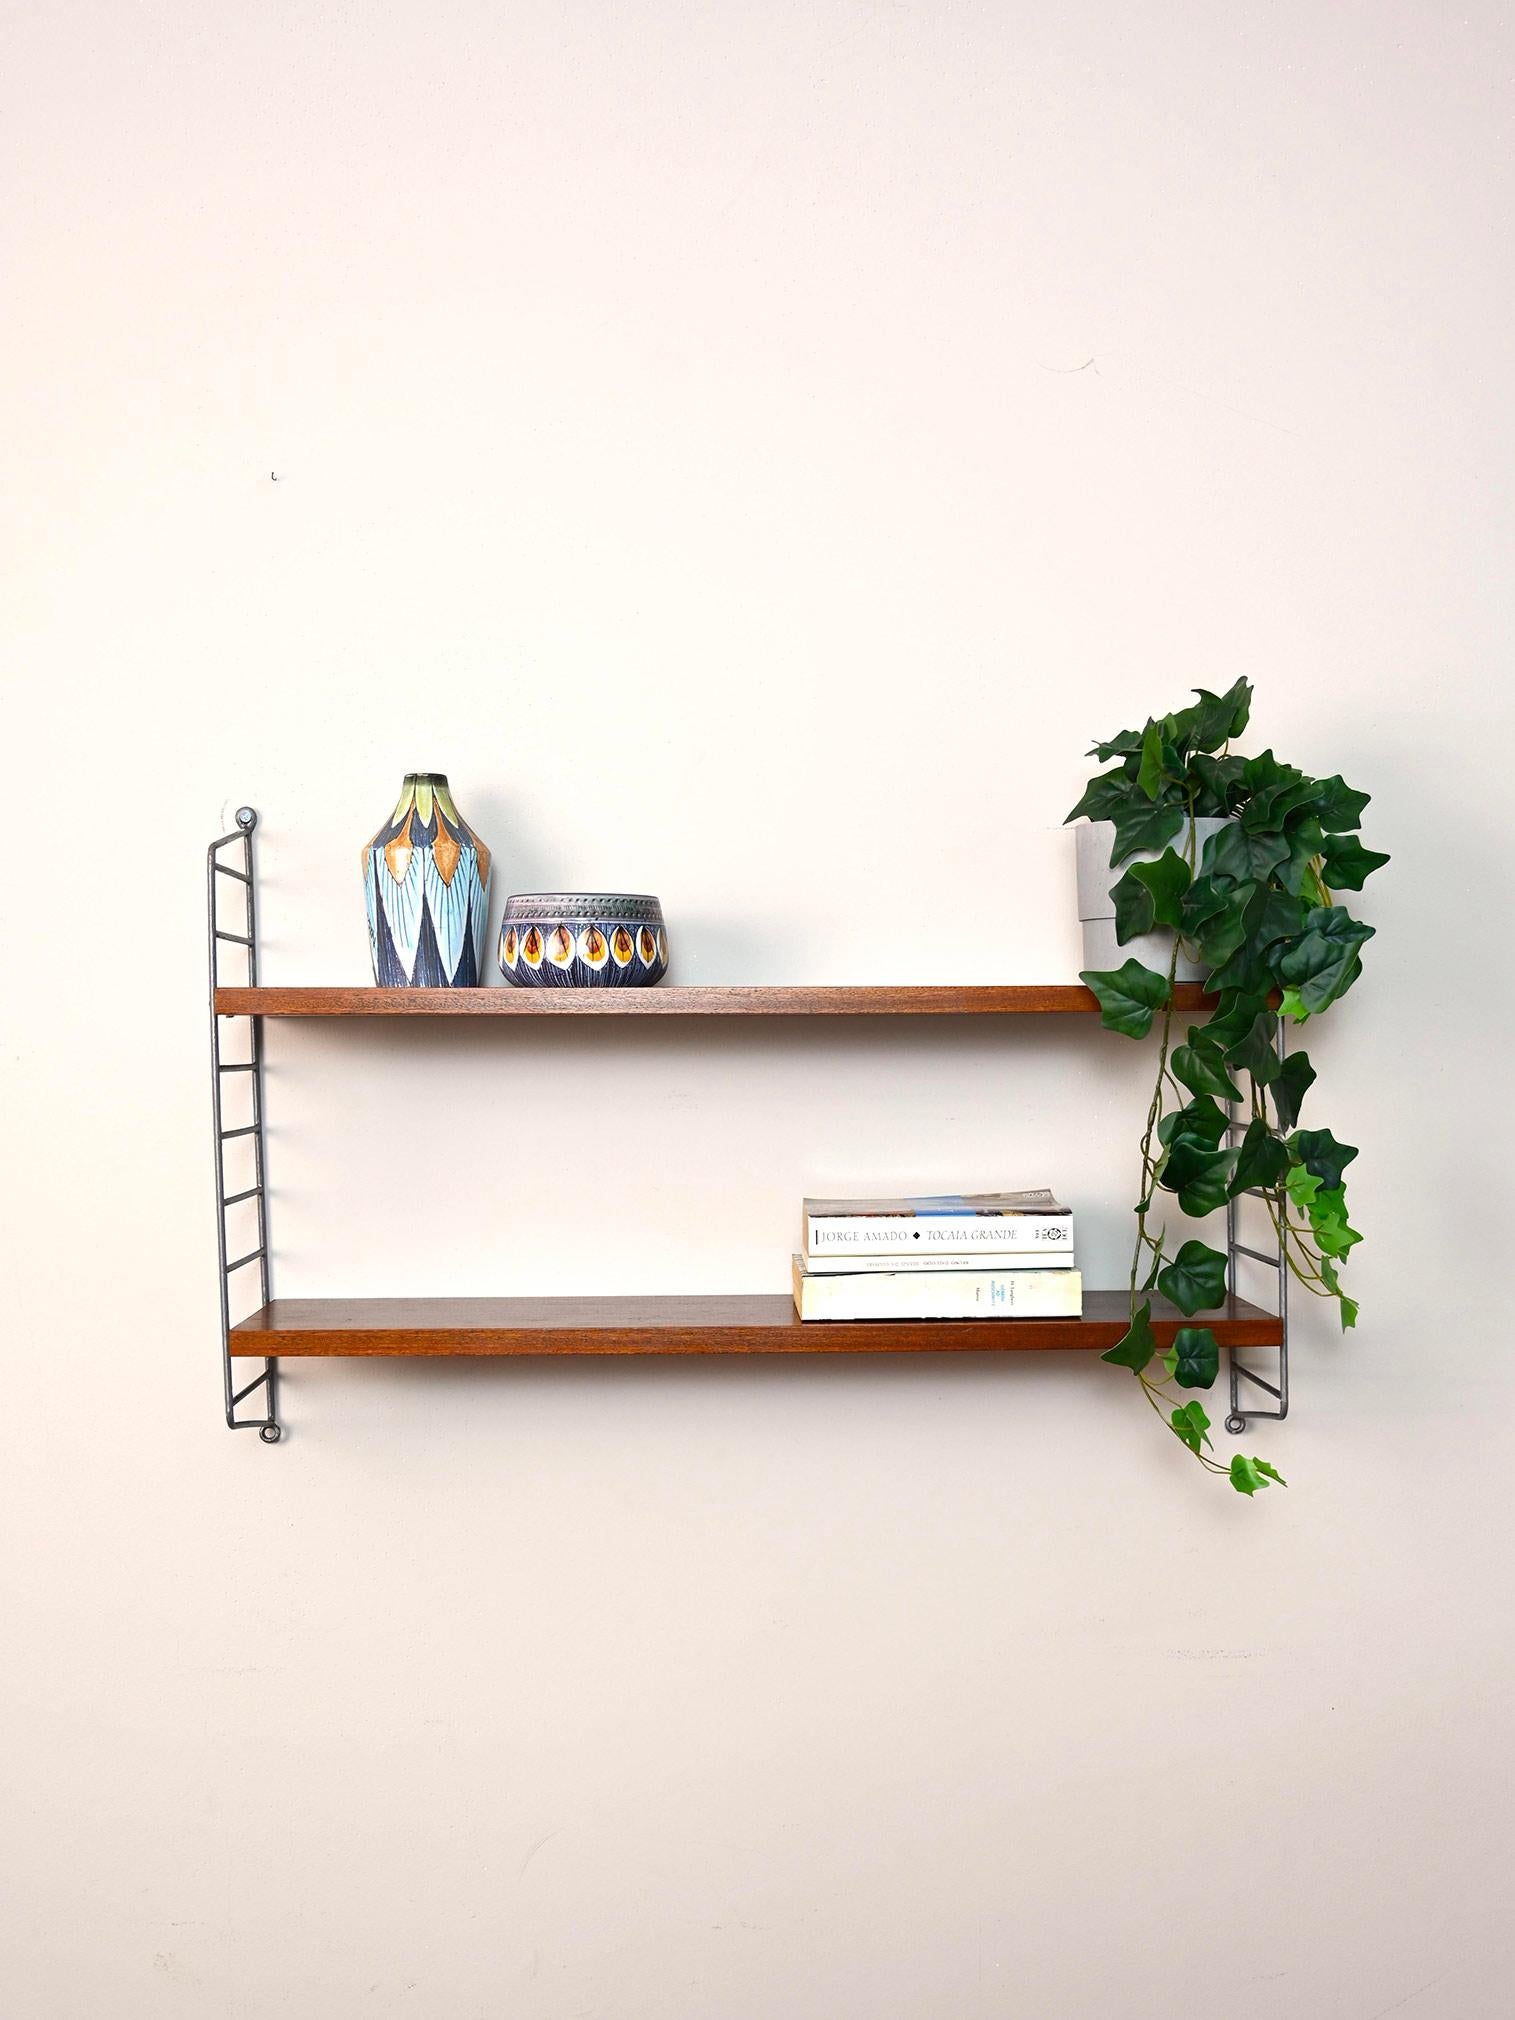 Original Scandinavian shelves from the 1960s.

This simple shelving system consists of a black metal side frame on which two wooden shelves rest.
Simple and functional it can be hung in different rooms of the house.

Good condition. It has been